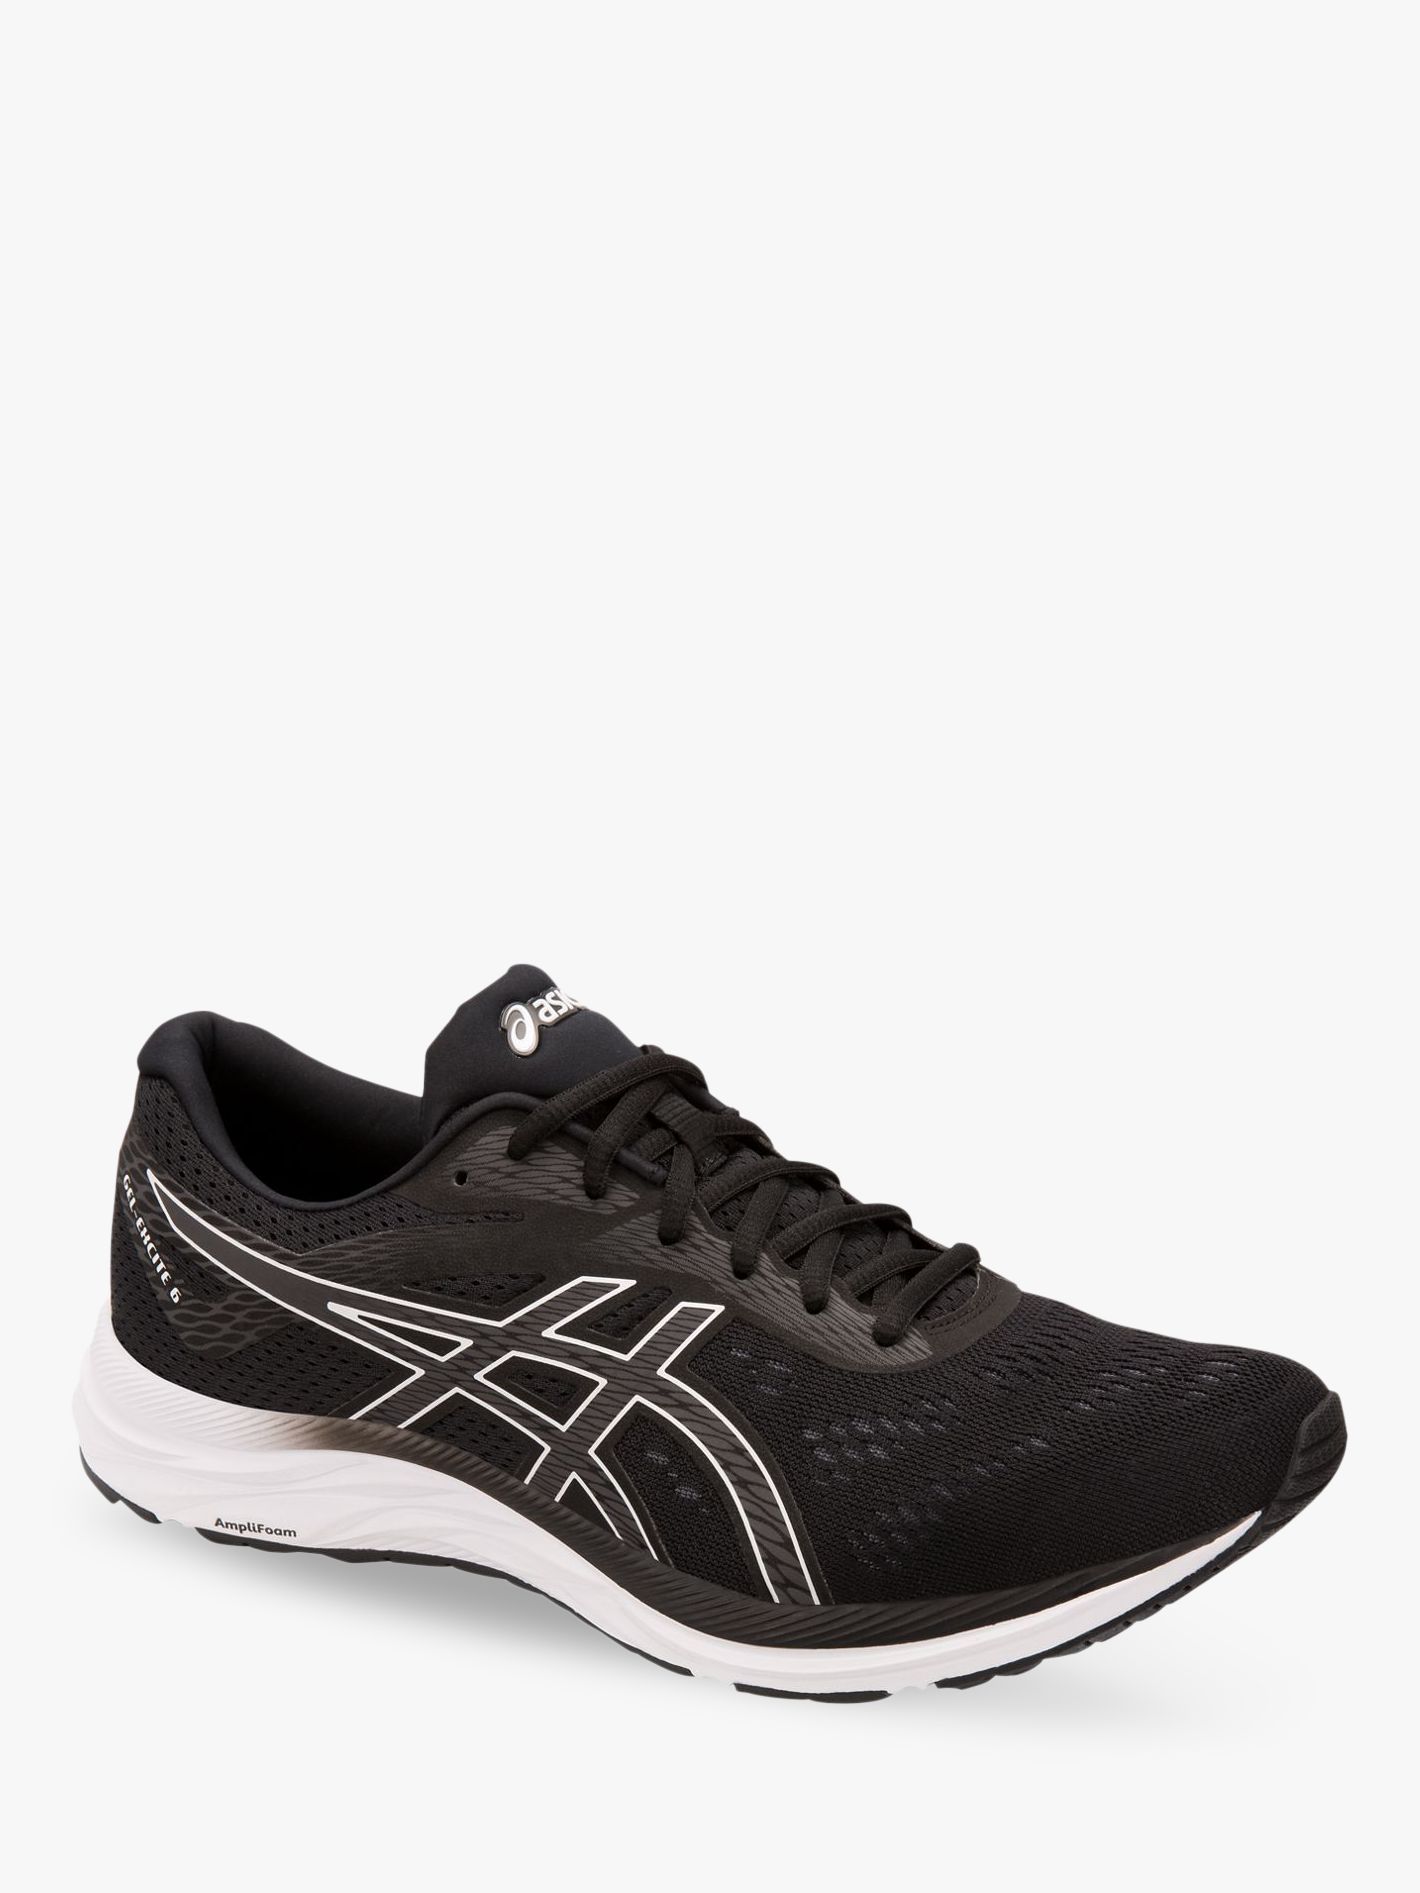 asics shoes black and white